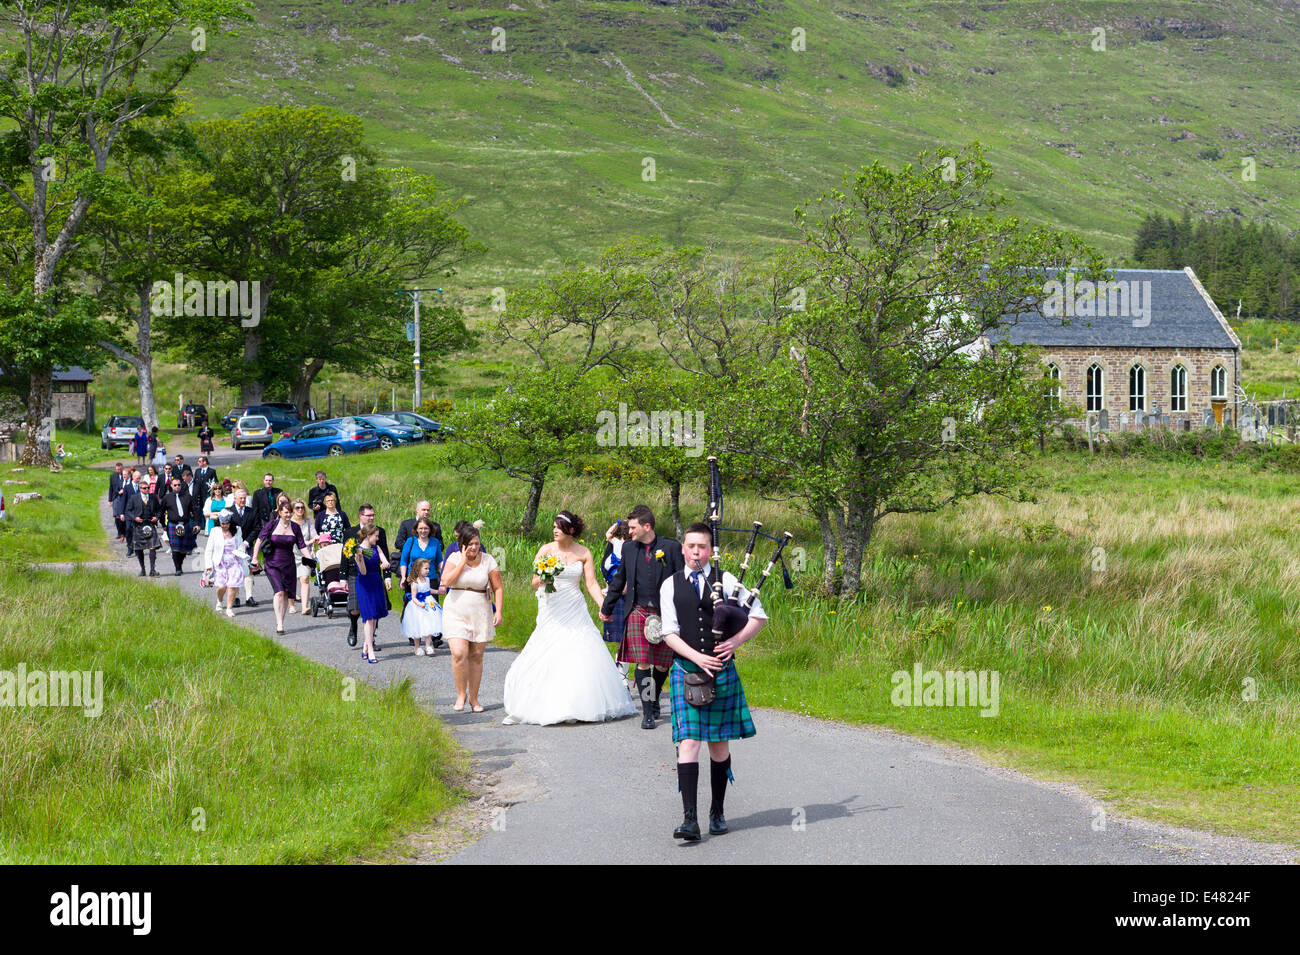 Highland Scottish wedding.  Piper leads procession of bride, groom and guests from Clachan Church in the Highlands of SCOTLAND Stock Photo